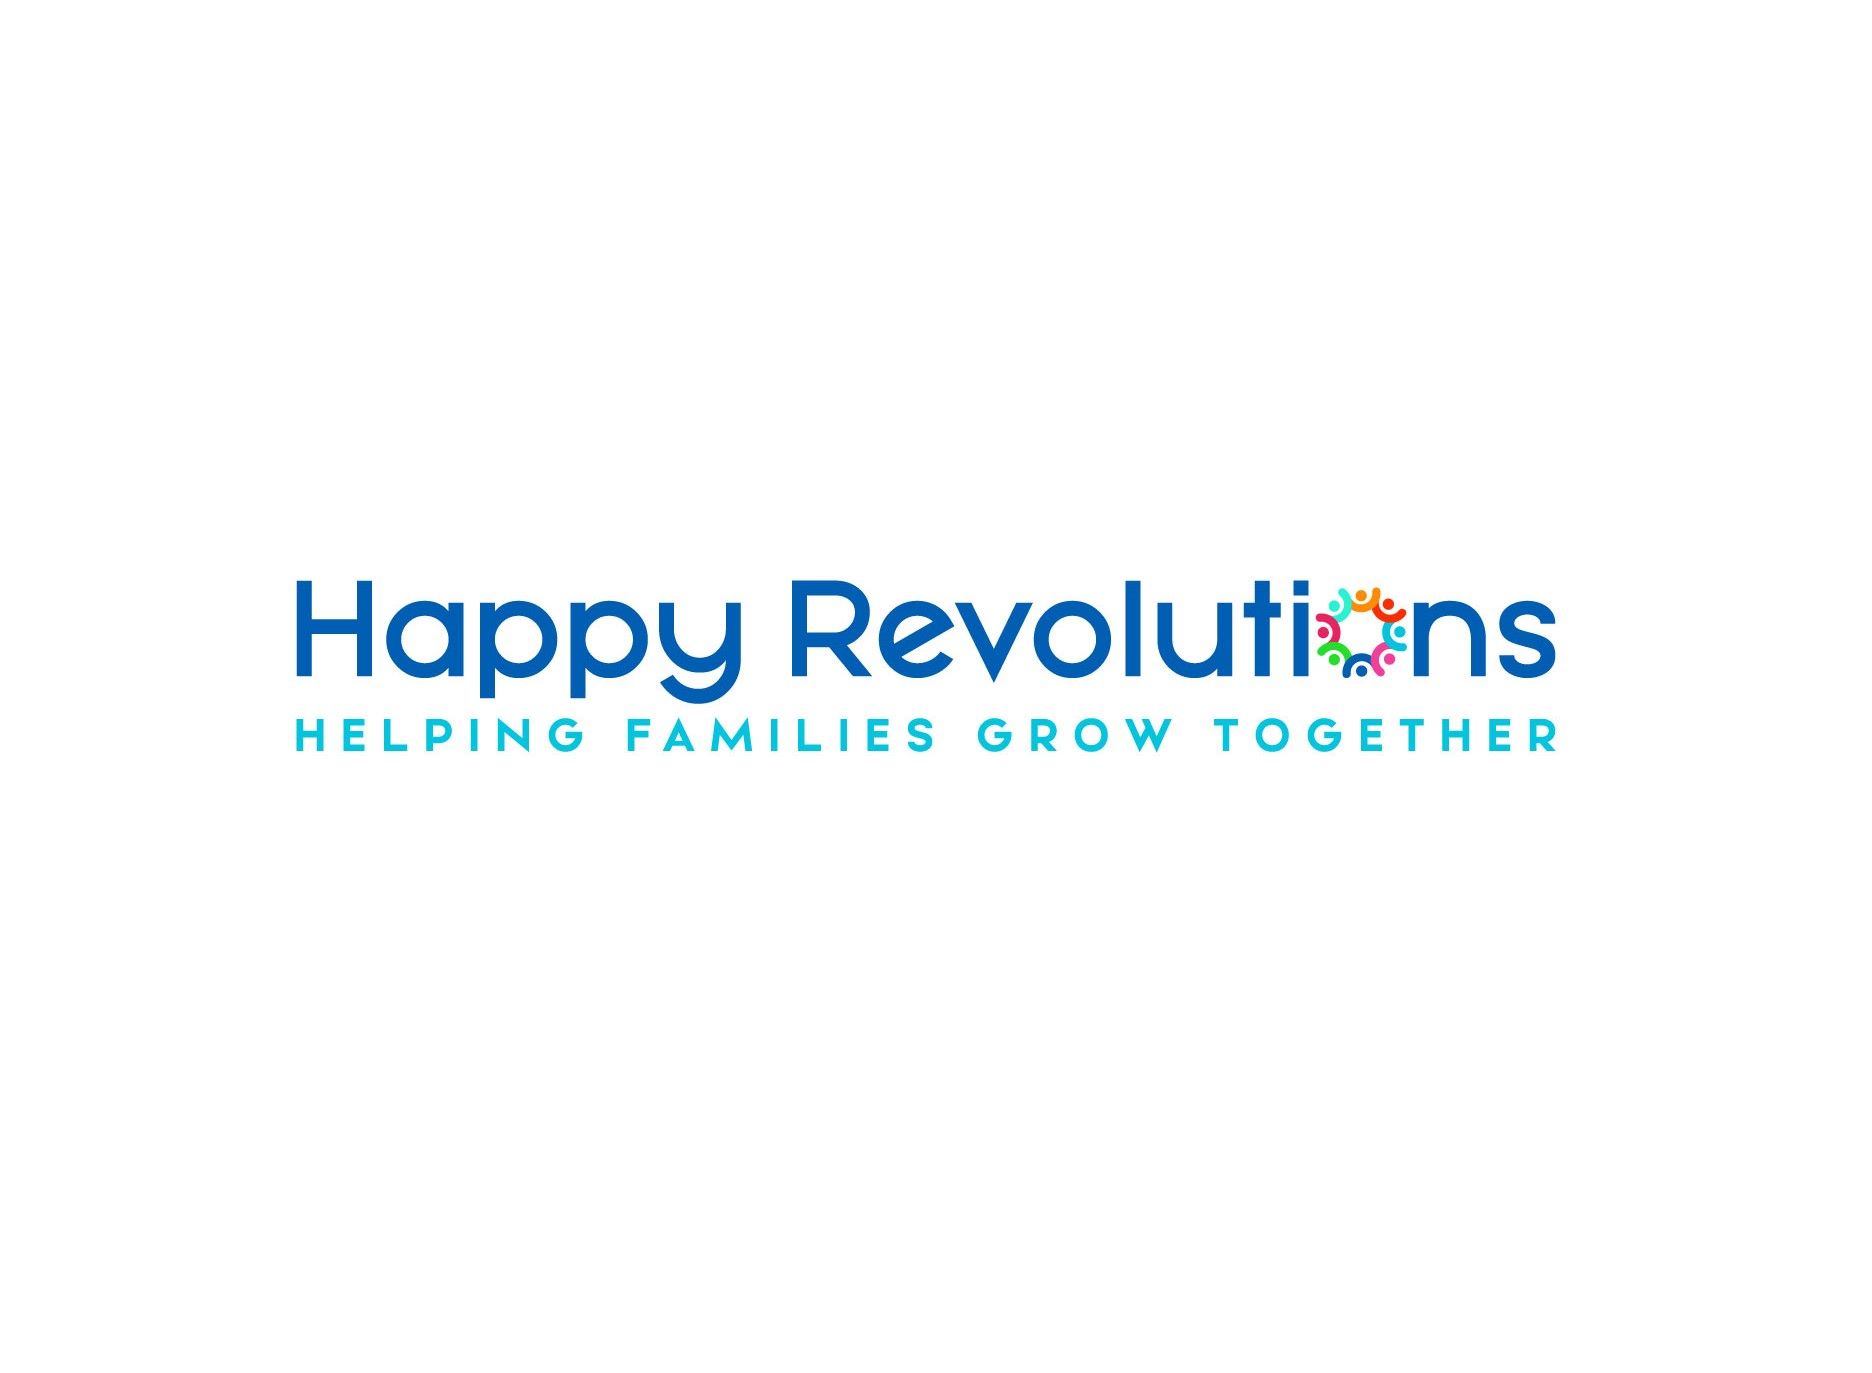 Ditch the Stress and Overwhelm - Happy Revolutions